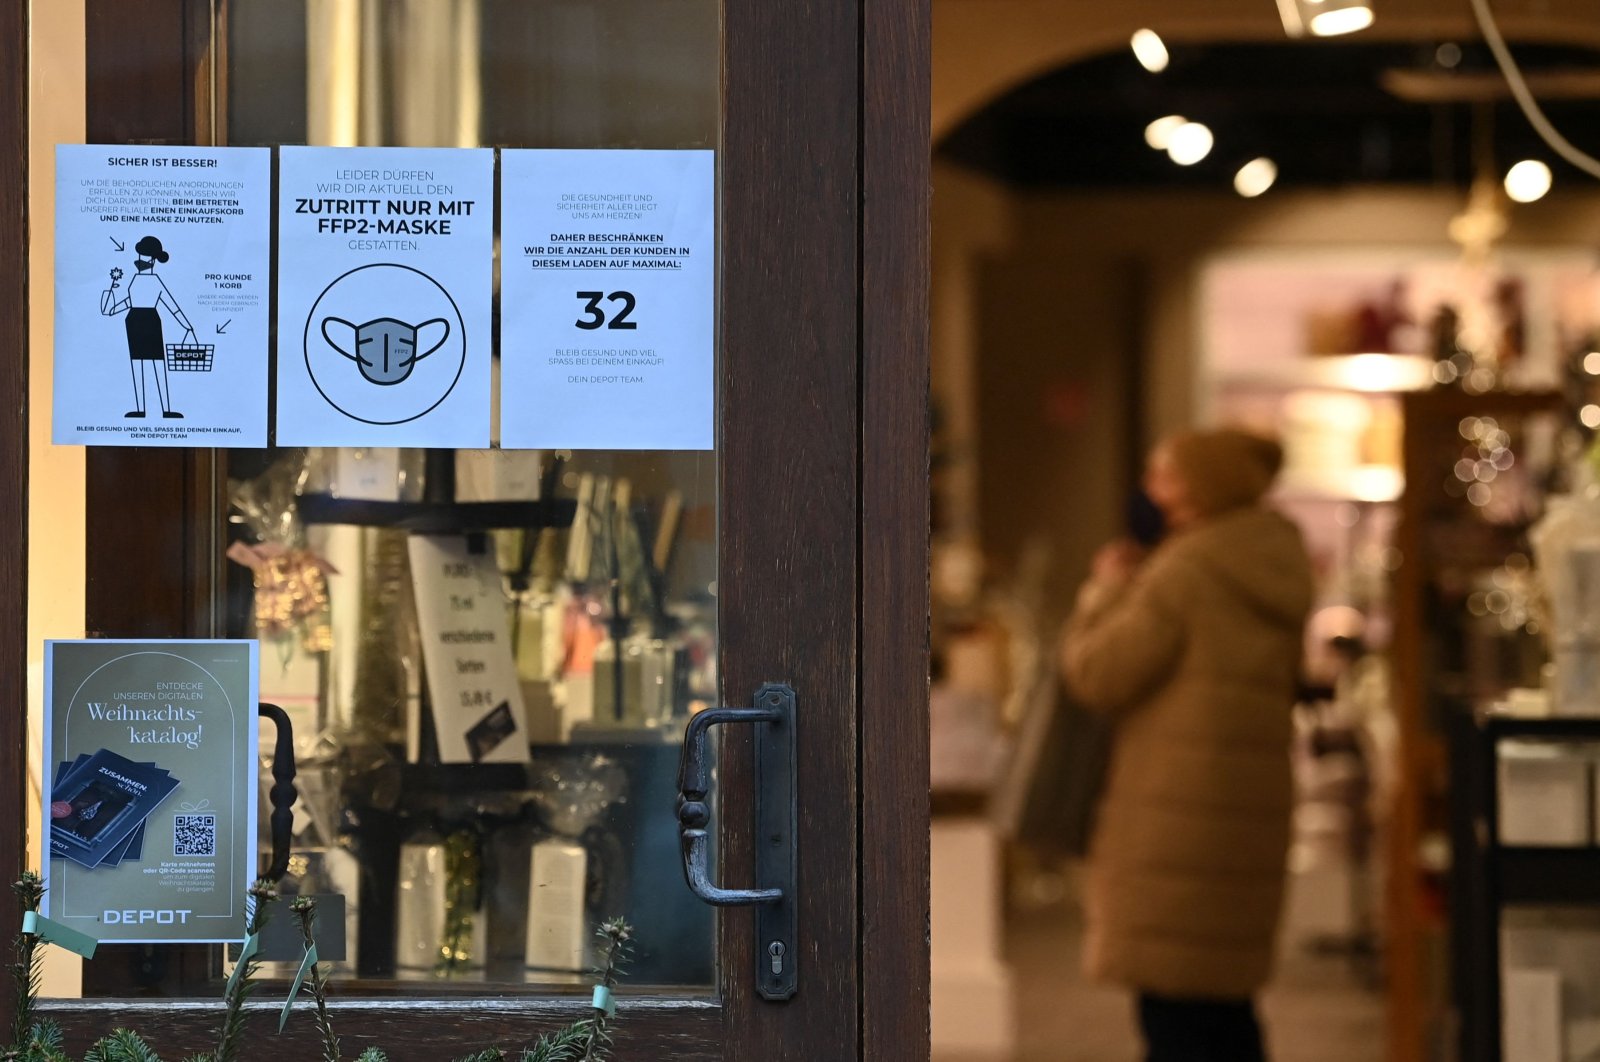 Amid the ongoing COVID-19 pandemic, information posters are seen at the entrance of a store in Muehldorf am Inn, southern Germany, Nov. 24, 2021 (AFP Photo)